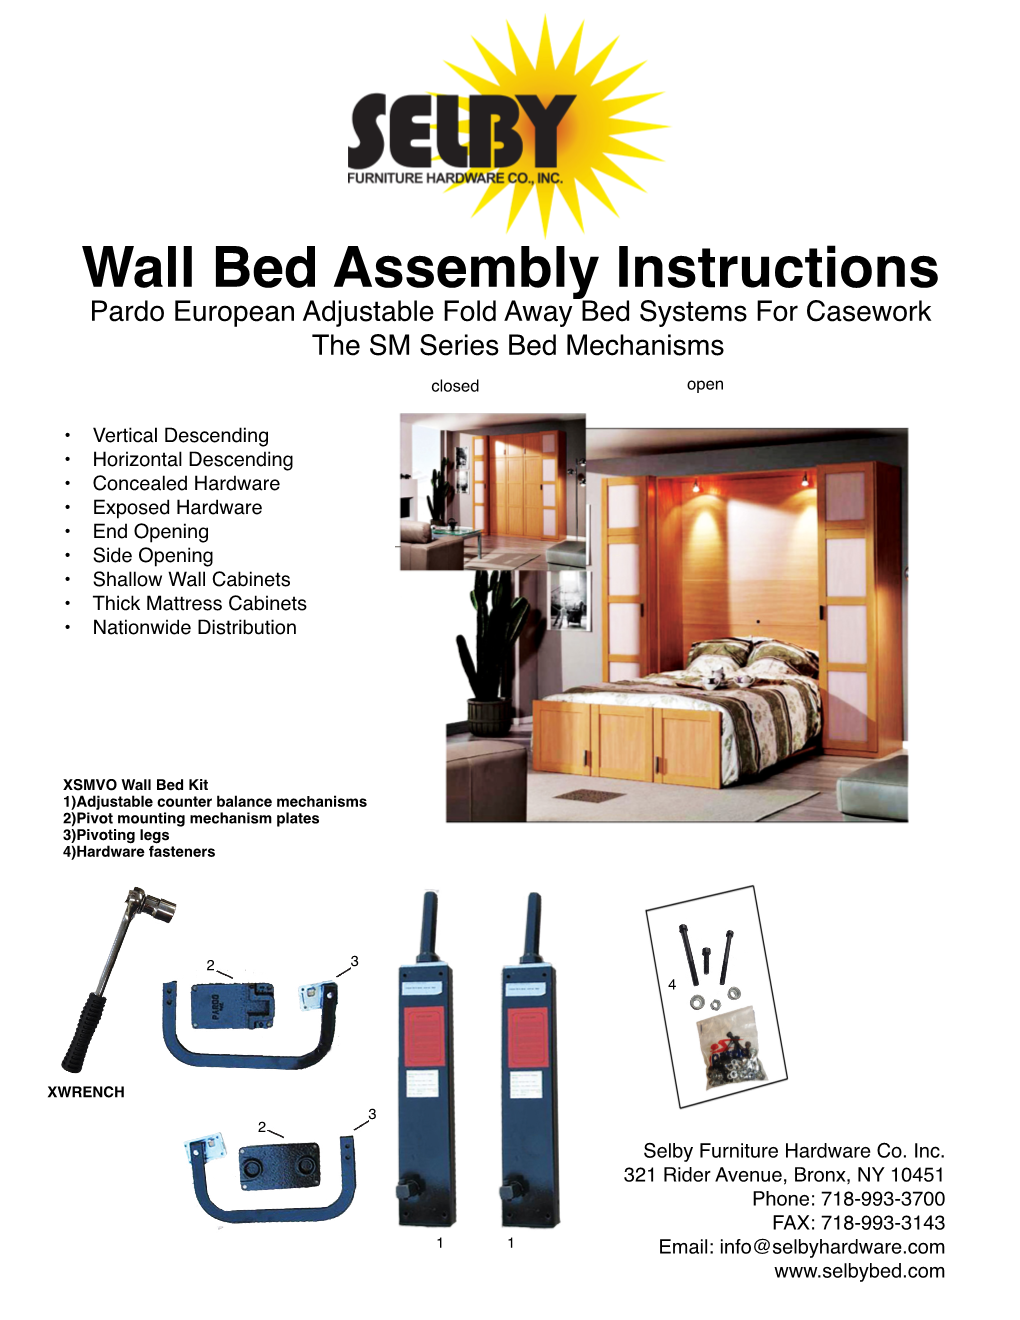 Wall Bed Assembly Instructions Pardo European Adjustable Fold Away Bed Systems for Casework the SM Series Bed Mechanisms Closed Open